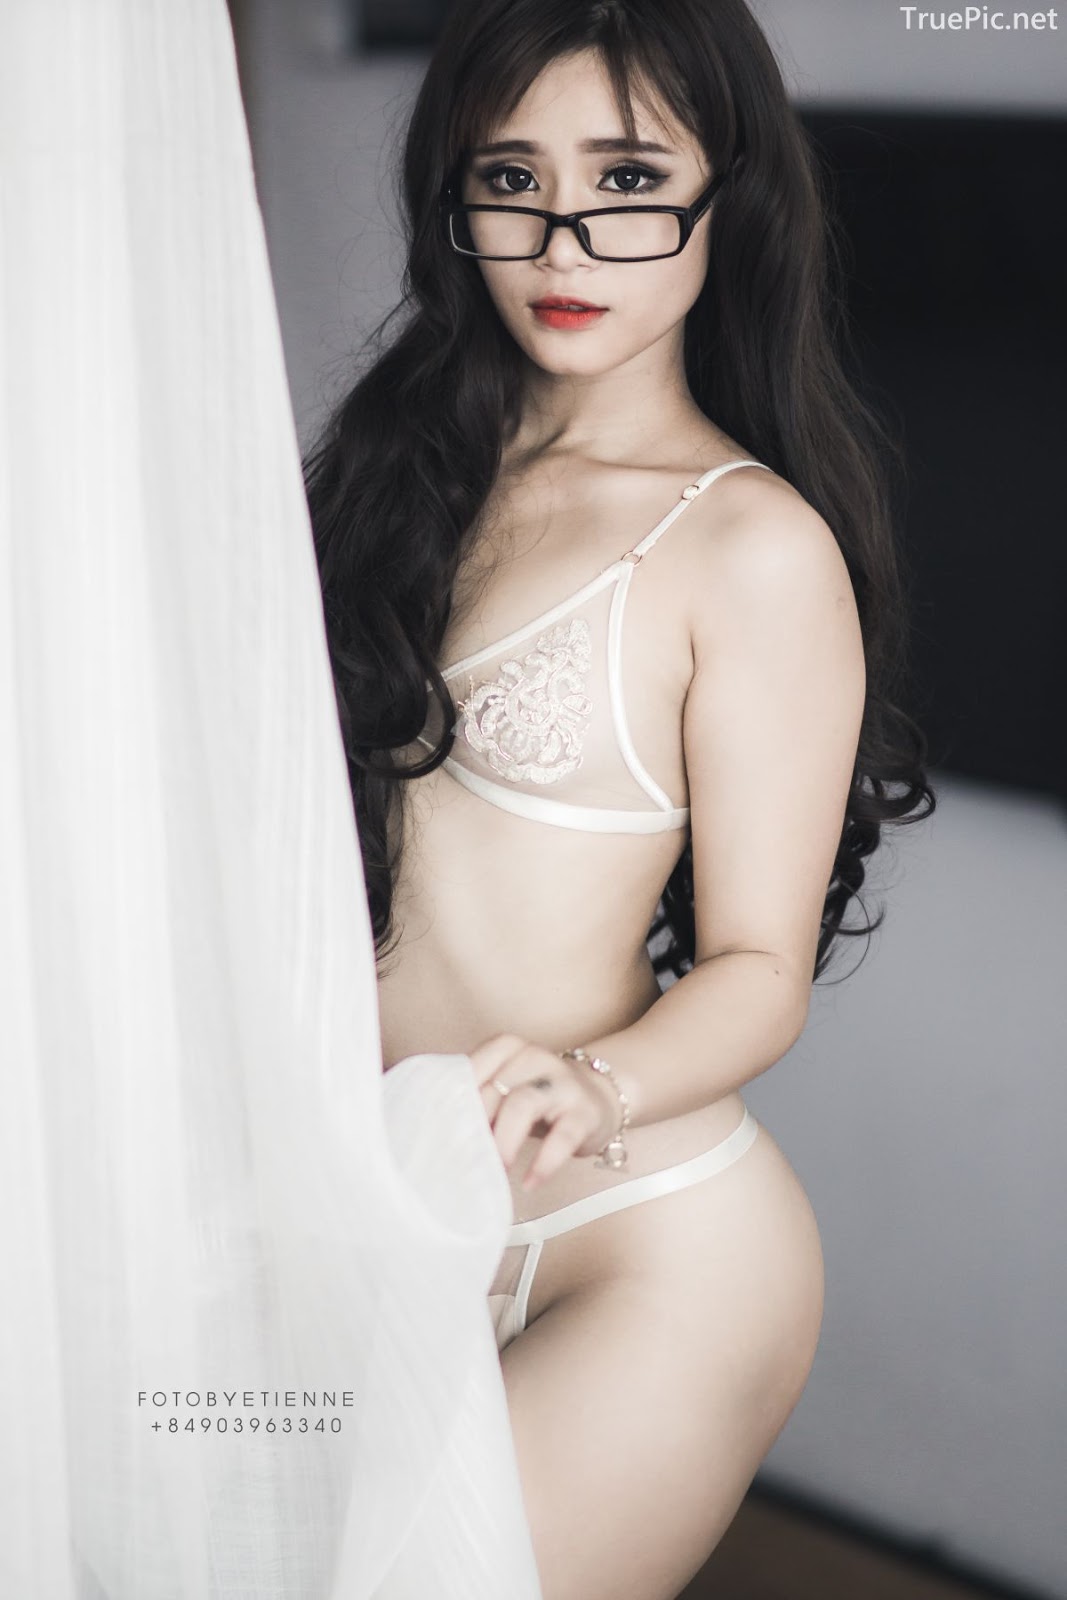 Super hot photos of Vietnamese beauties with lingerie and bikini - Photo by Le Blanc Studio - Part 3 - Picture 17